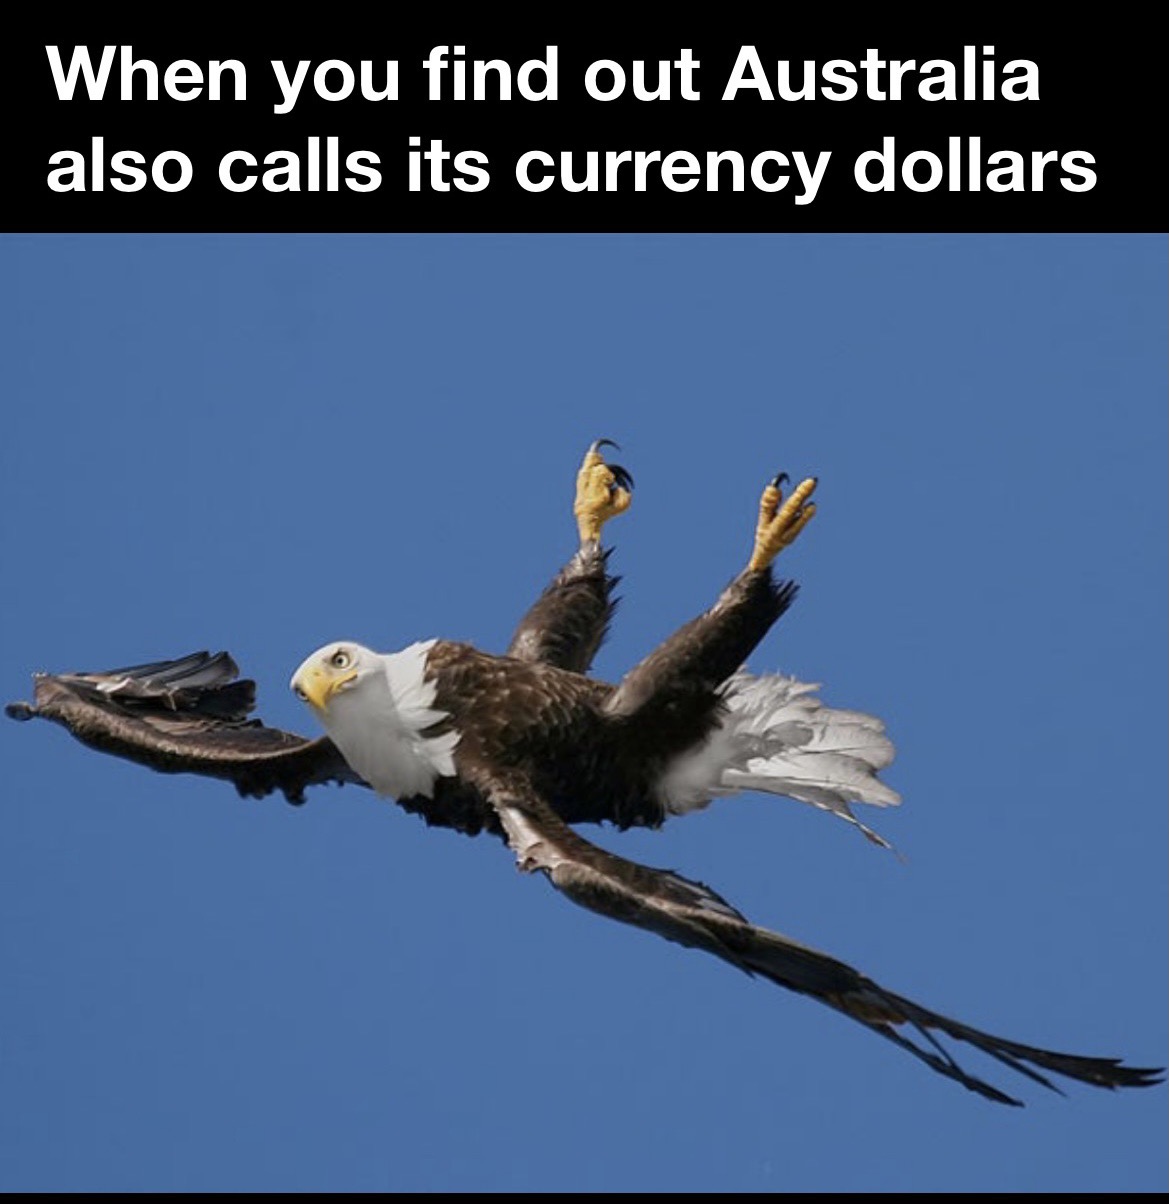 eagle flying upside down - When you find out Australia also calls its currency dollars